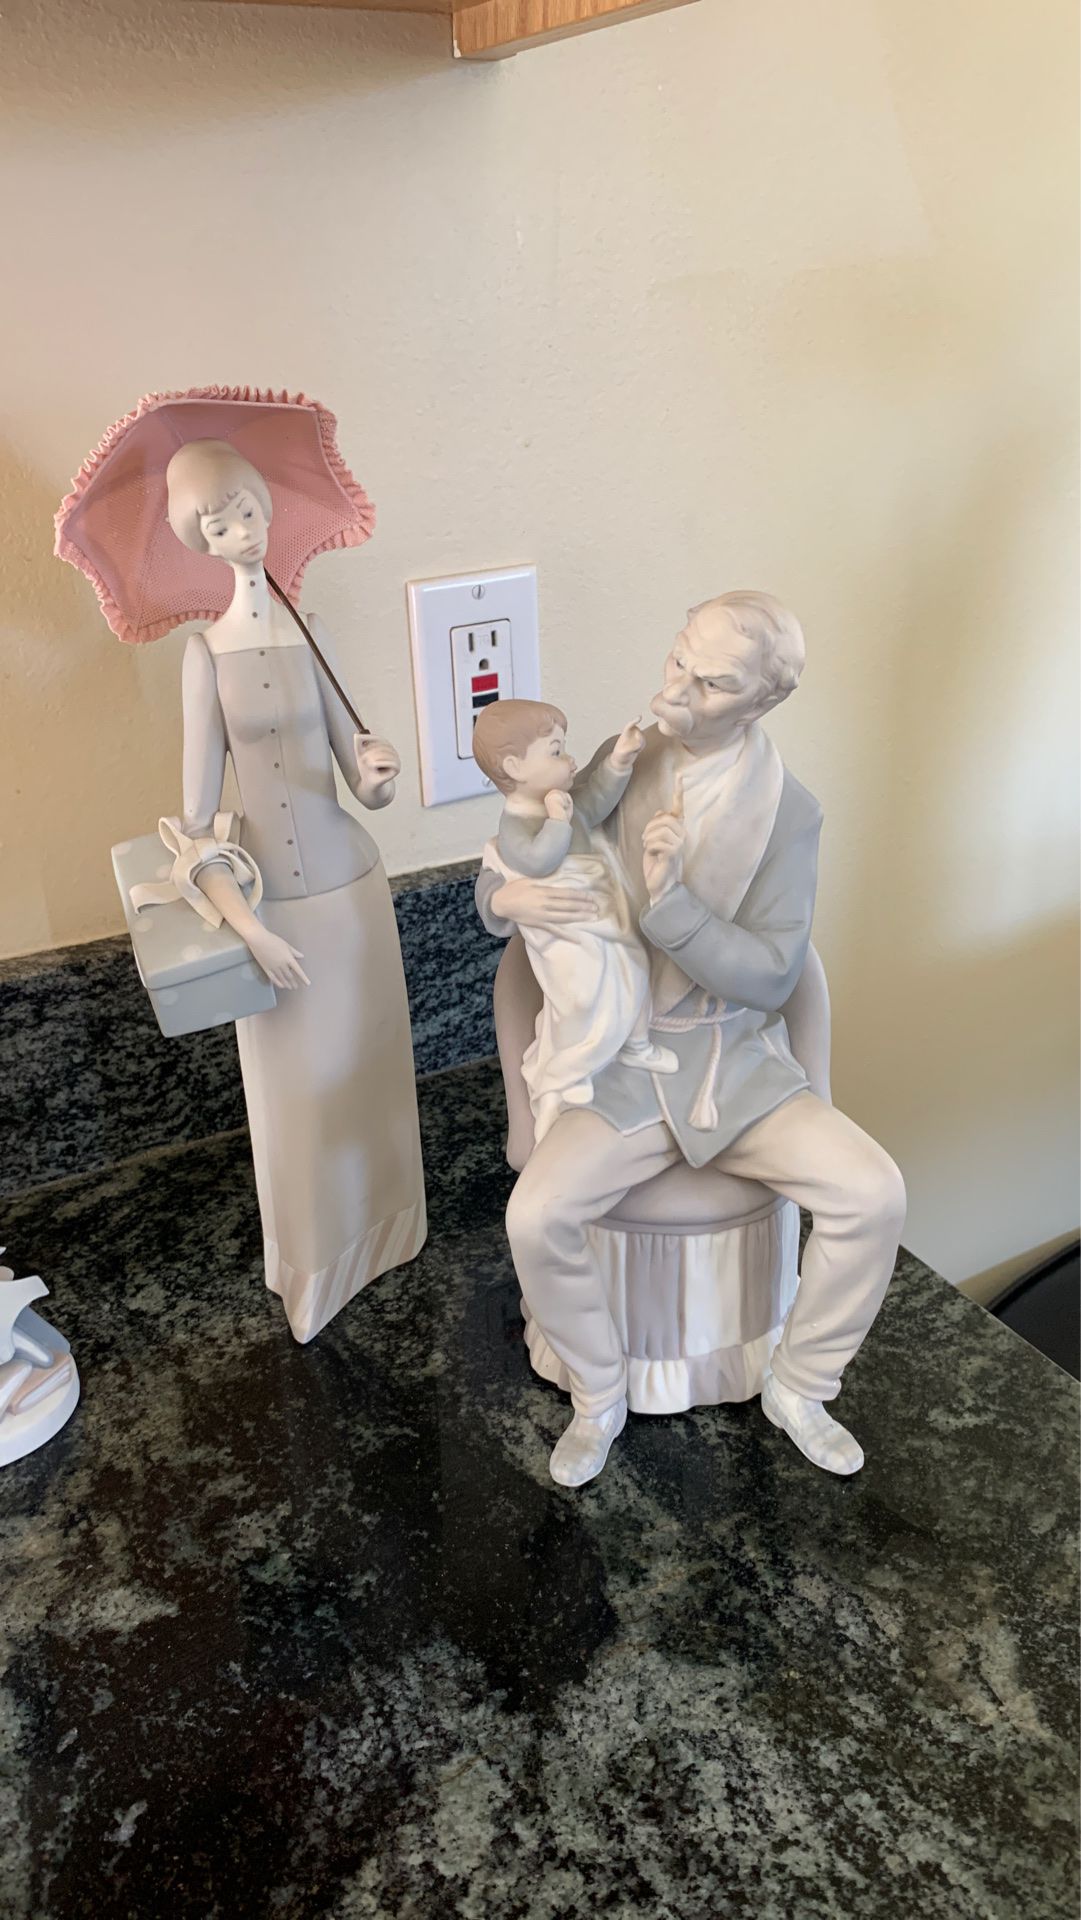 Hummel/lladro/and other high collectible big figurine.